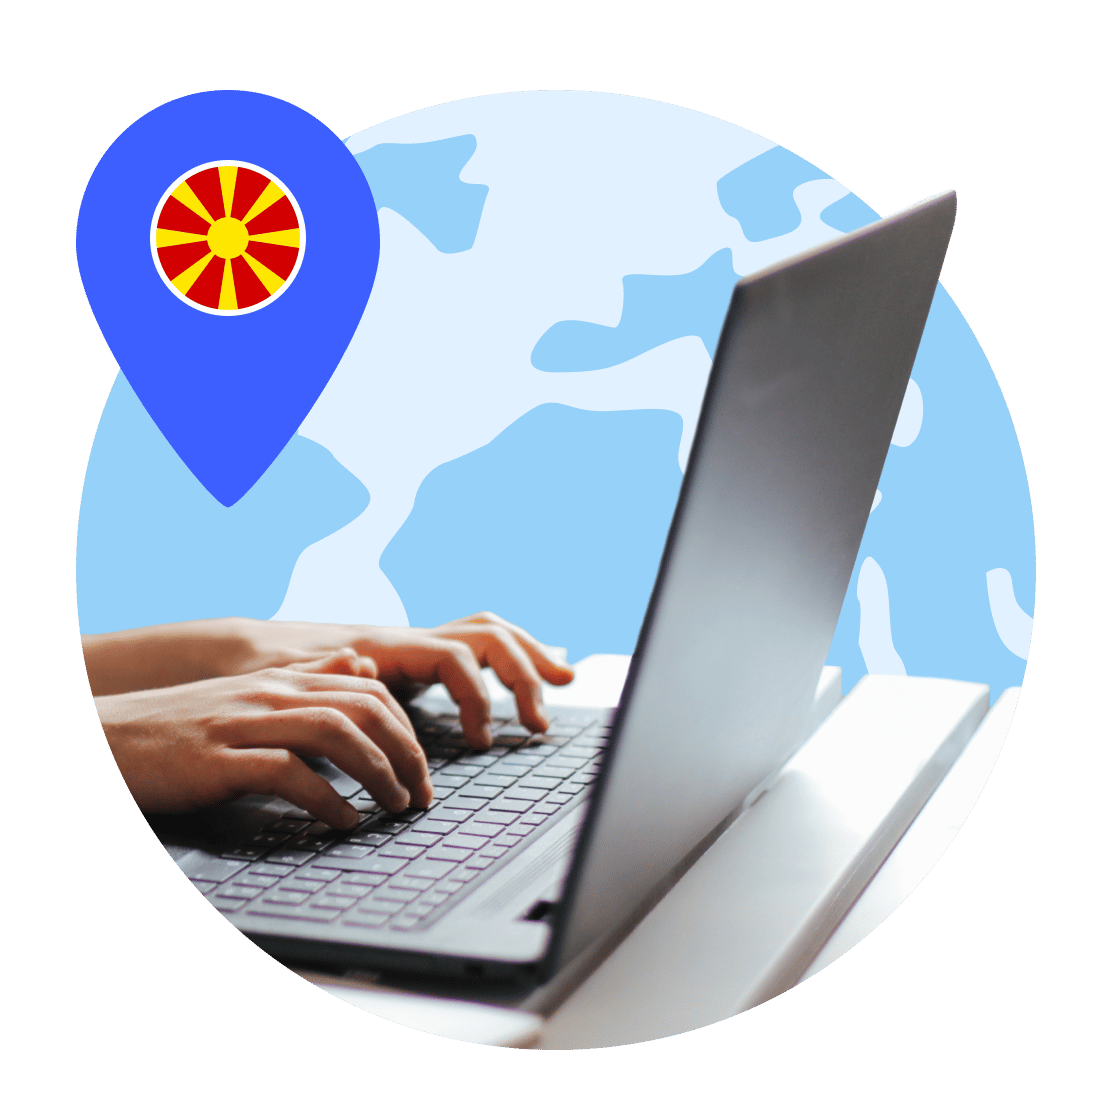 A person is using NordVPN to connect a Macedonia server.